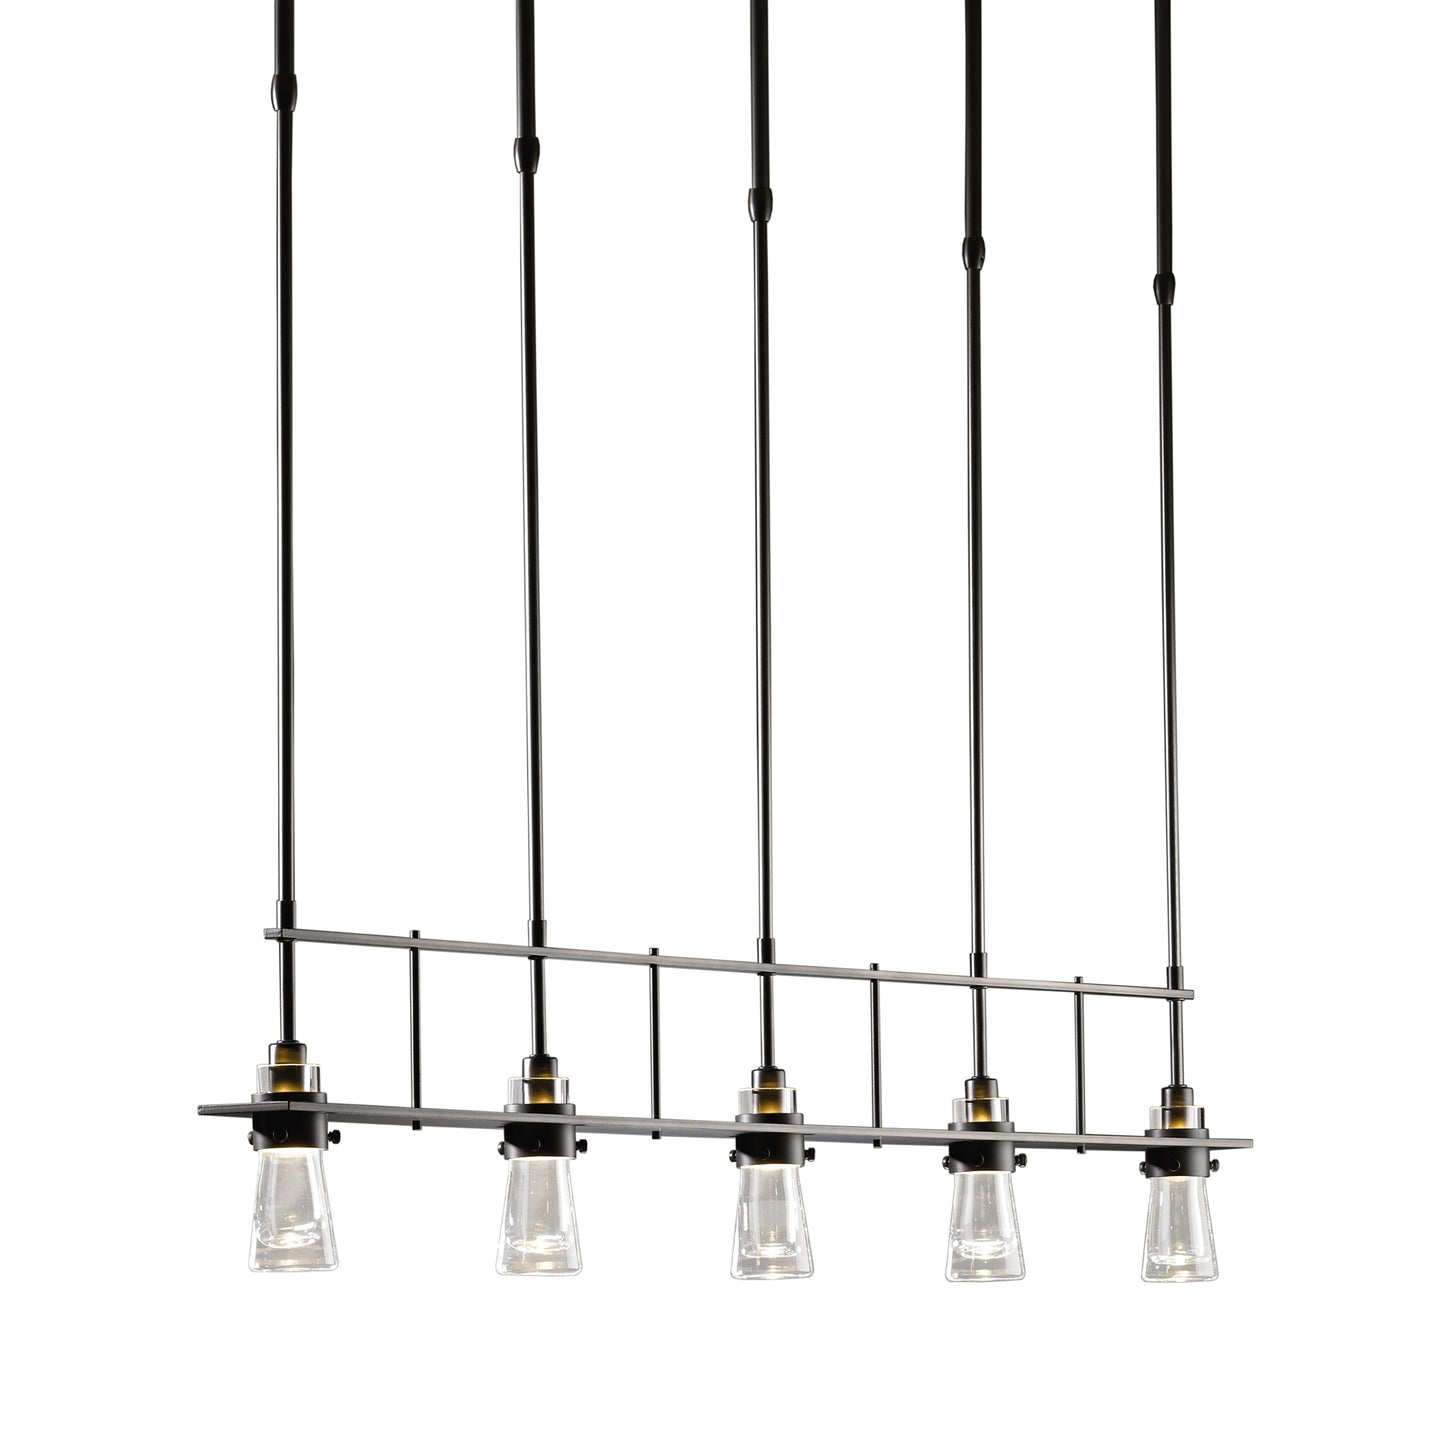 An Erlenmeyer 5-Light Pendant fixture suspended from a black metal rod, made by Hubbardton Forge.